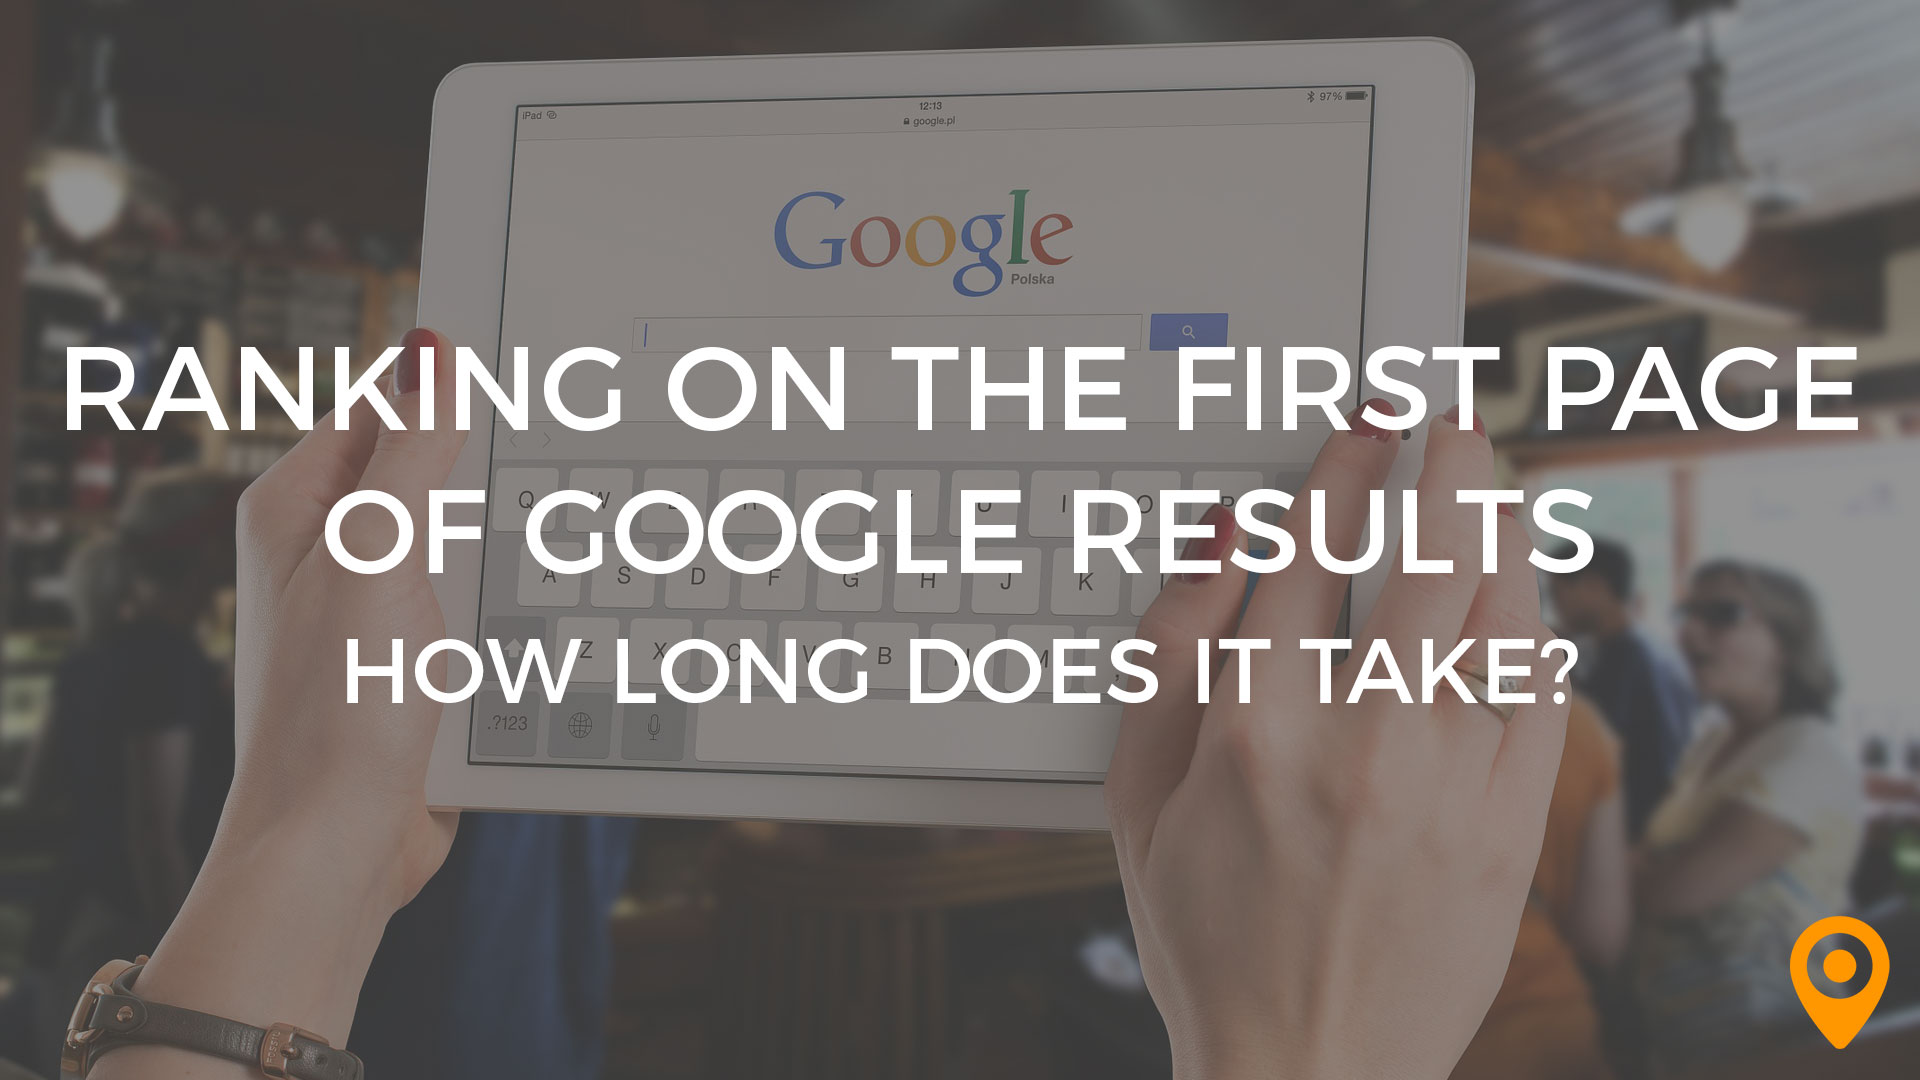 How Long Does It Take to Rank in Google?